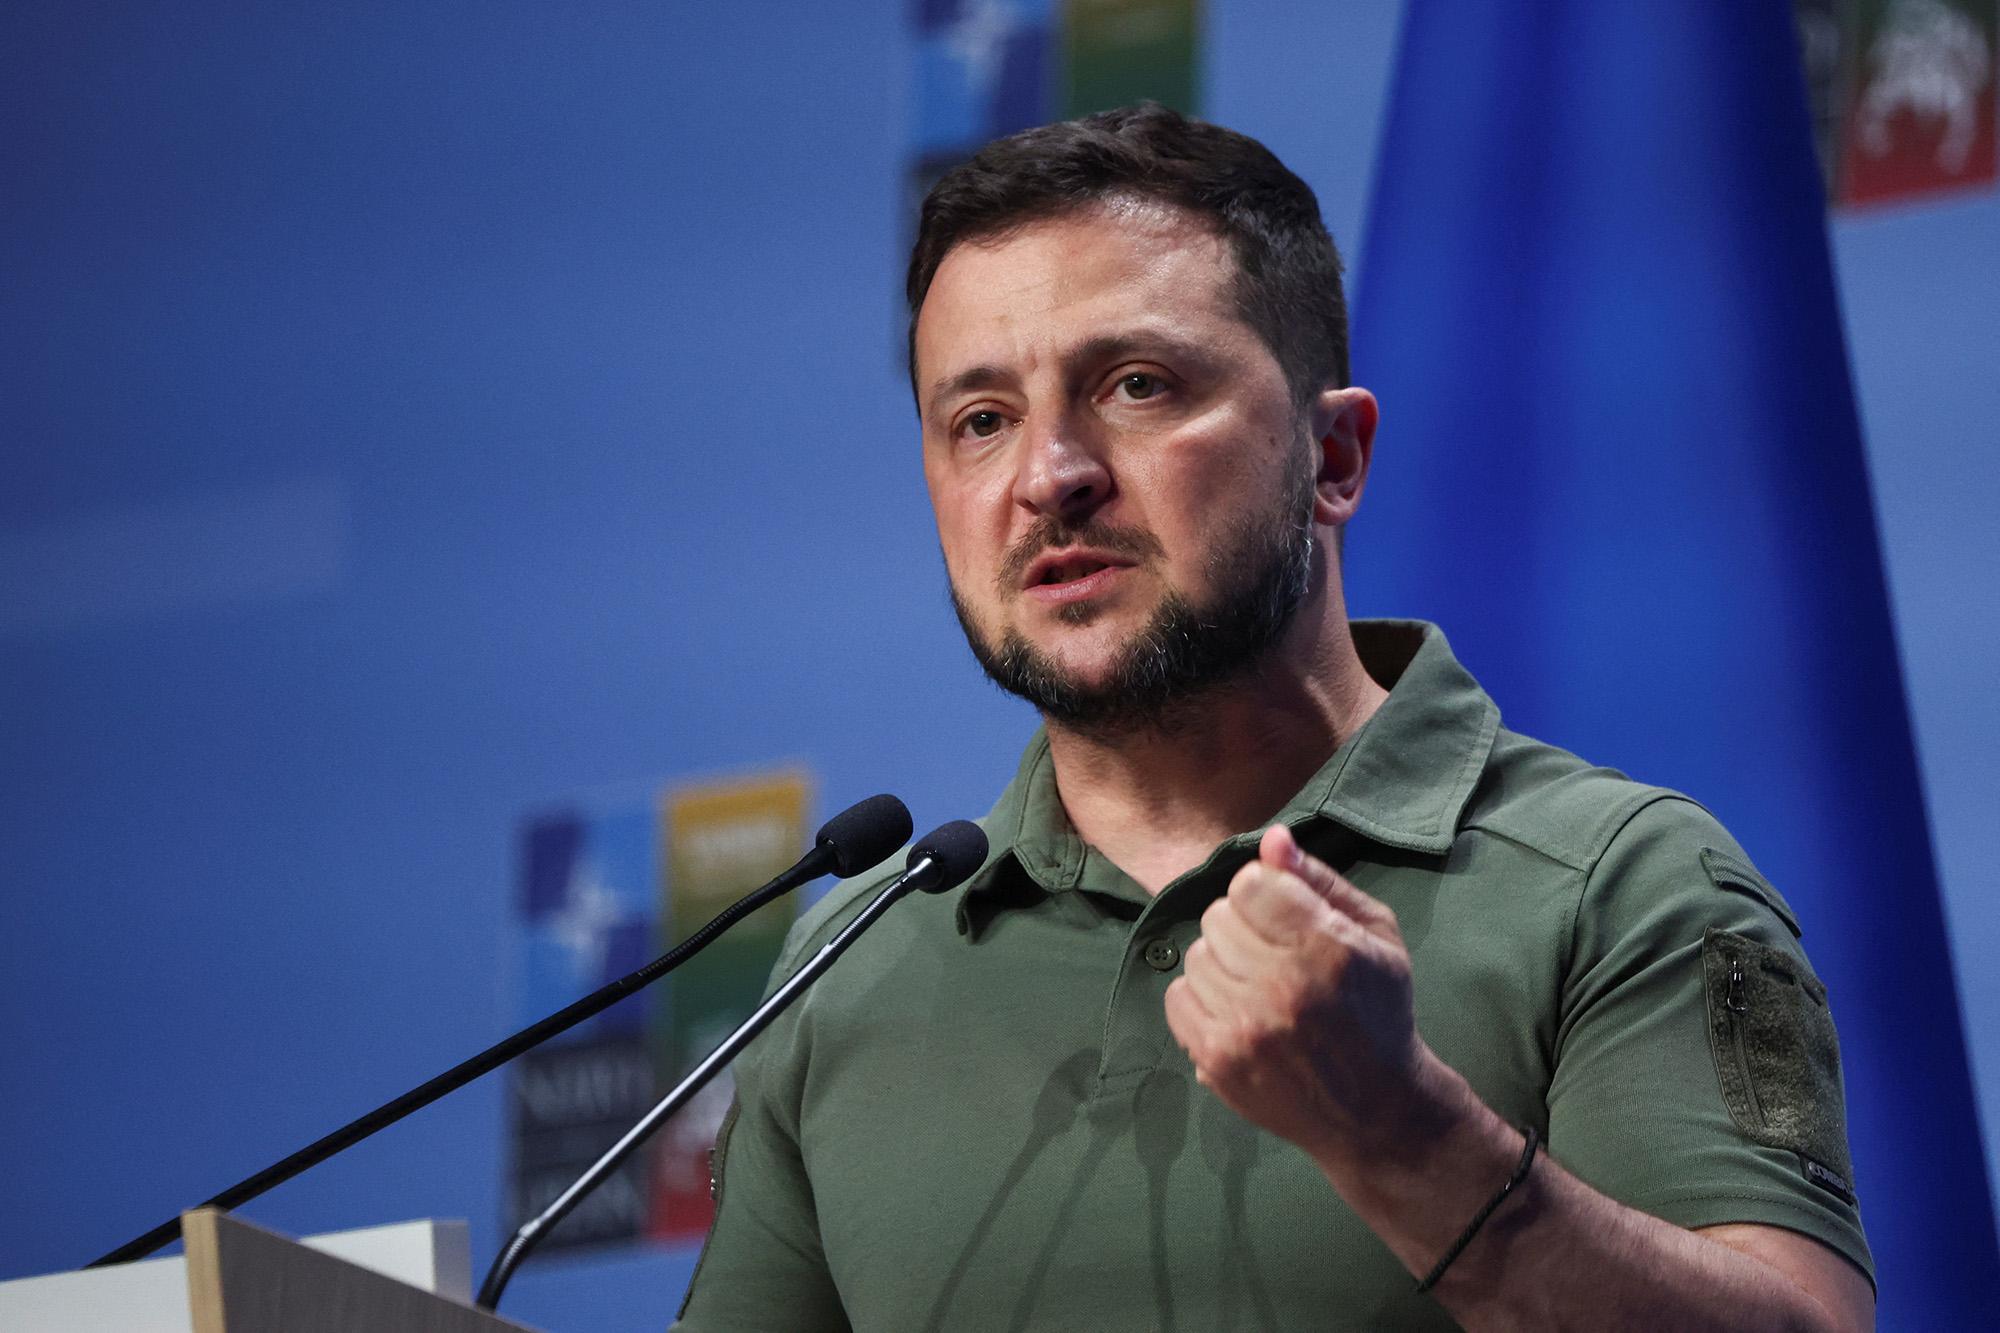 Ukraine's President Volodymyr Zelensky holds a press conference during a NATO leaders summit in Vilnius, Lithuania, on July 12.